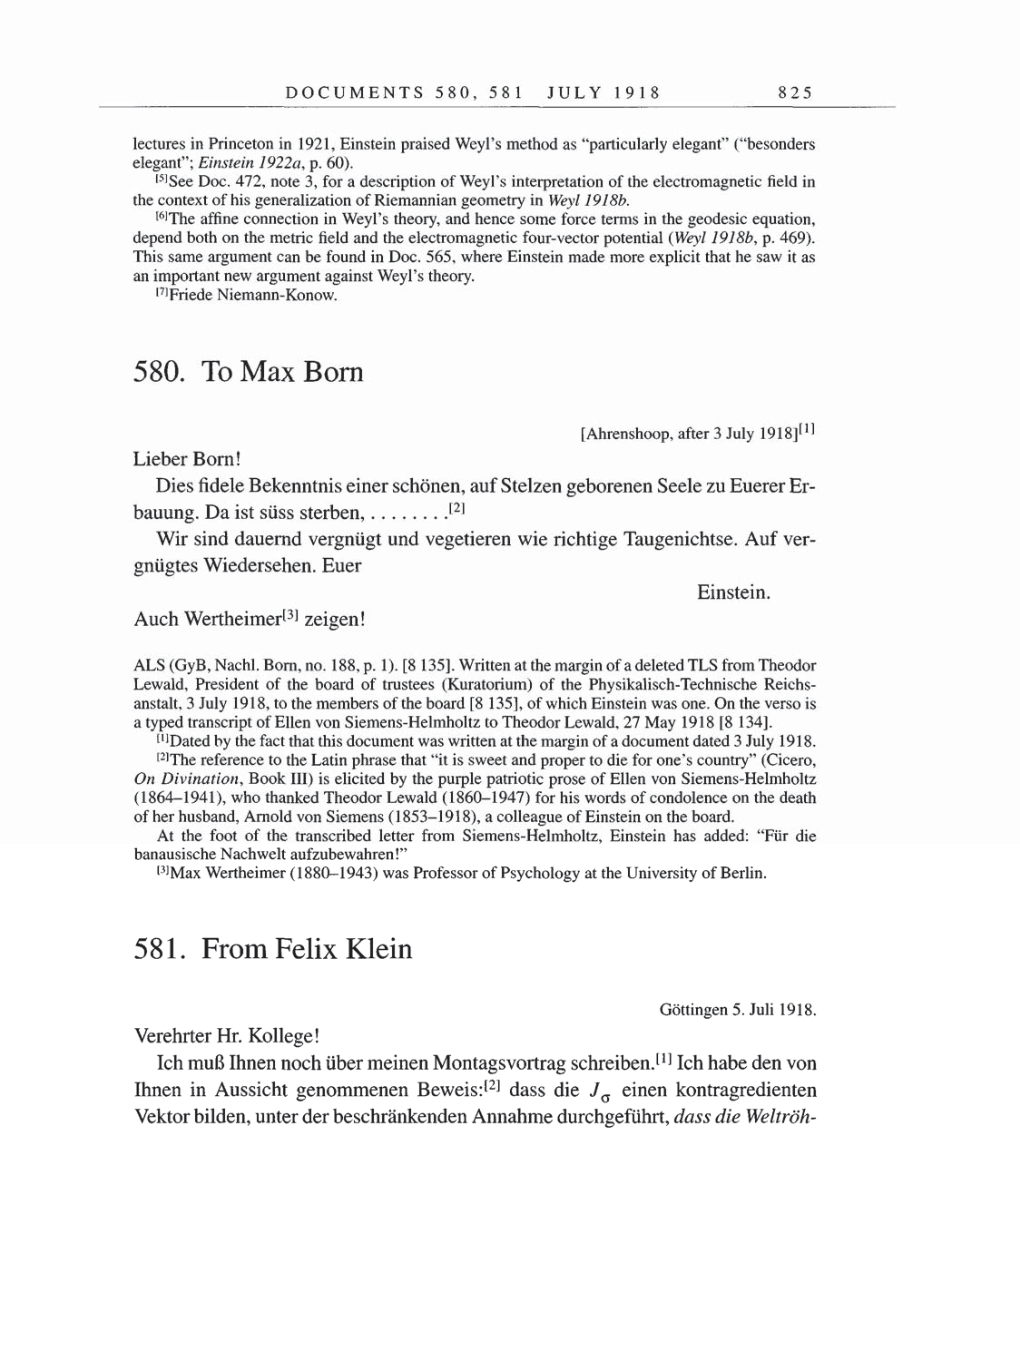 Volume 8, Part B: The Berlin Years: Correspondence 1918 page 825